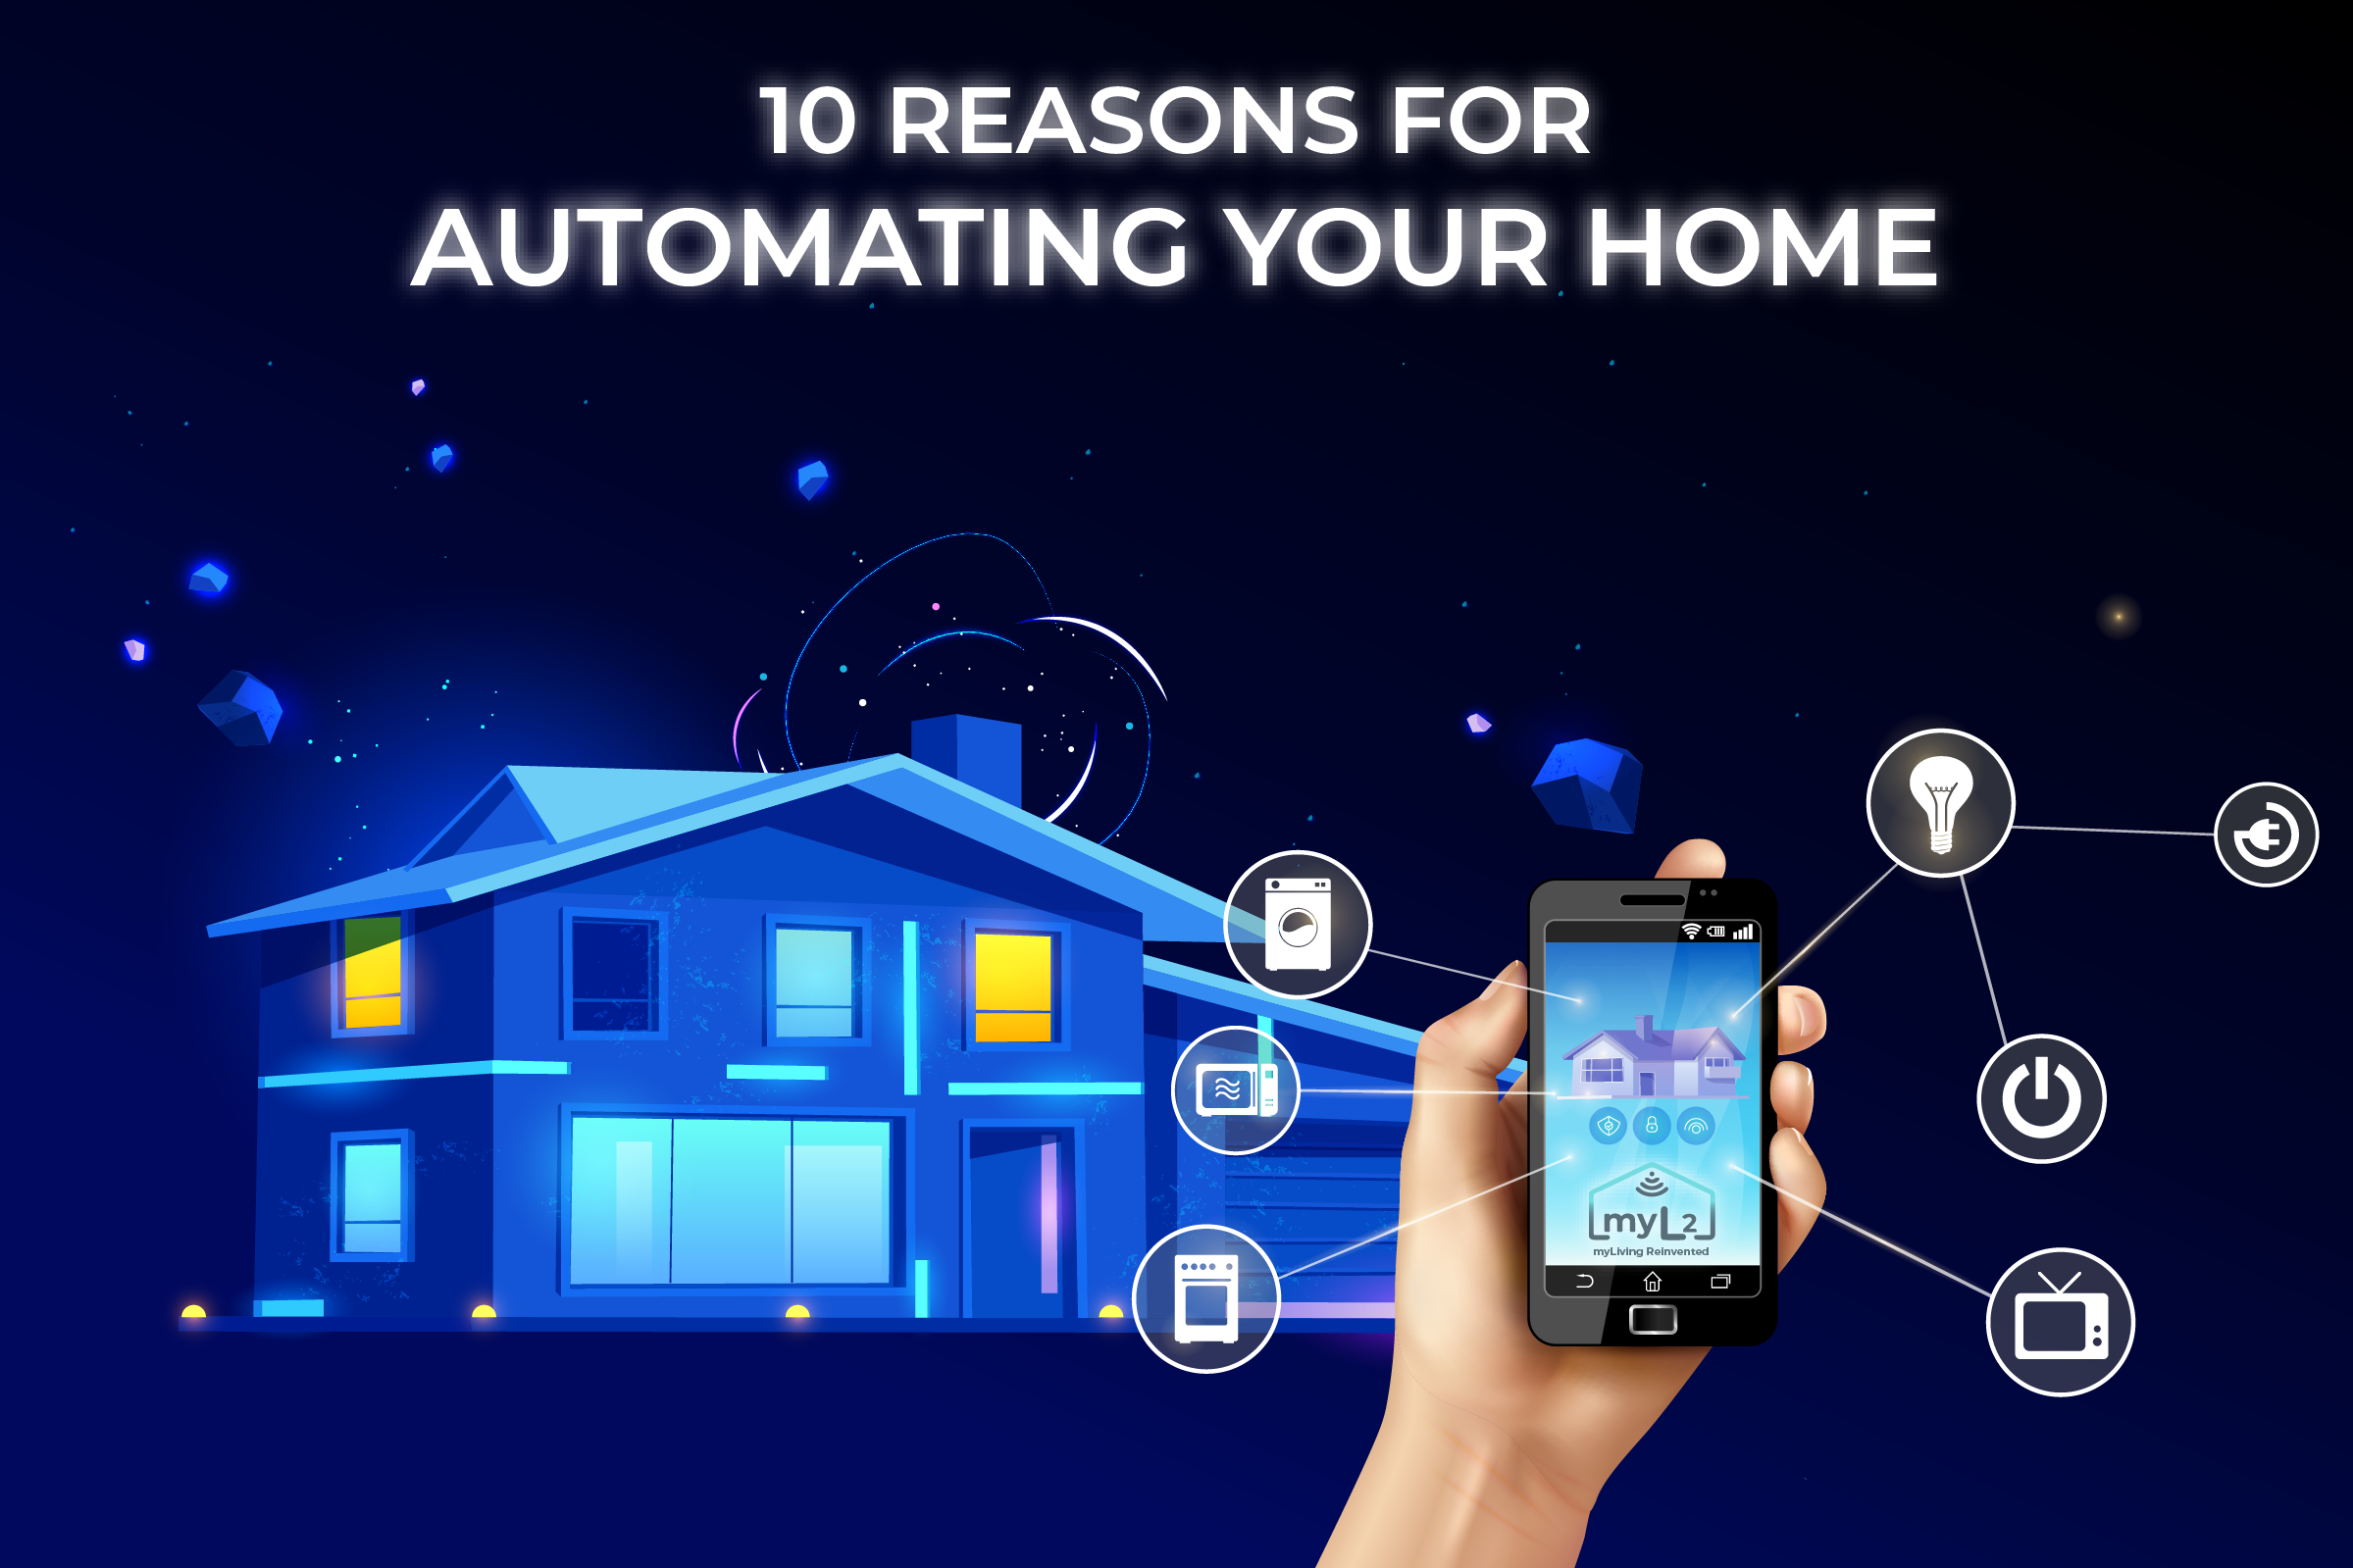 10 reasons benefits for automating your home